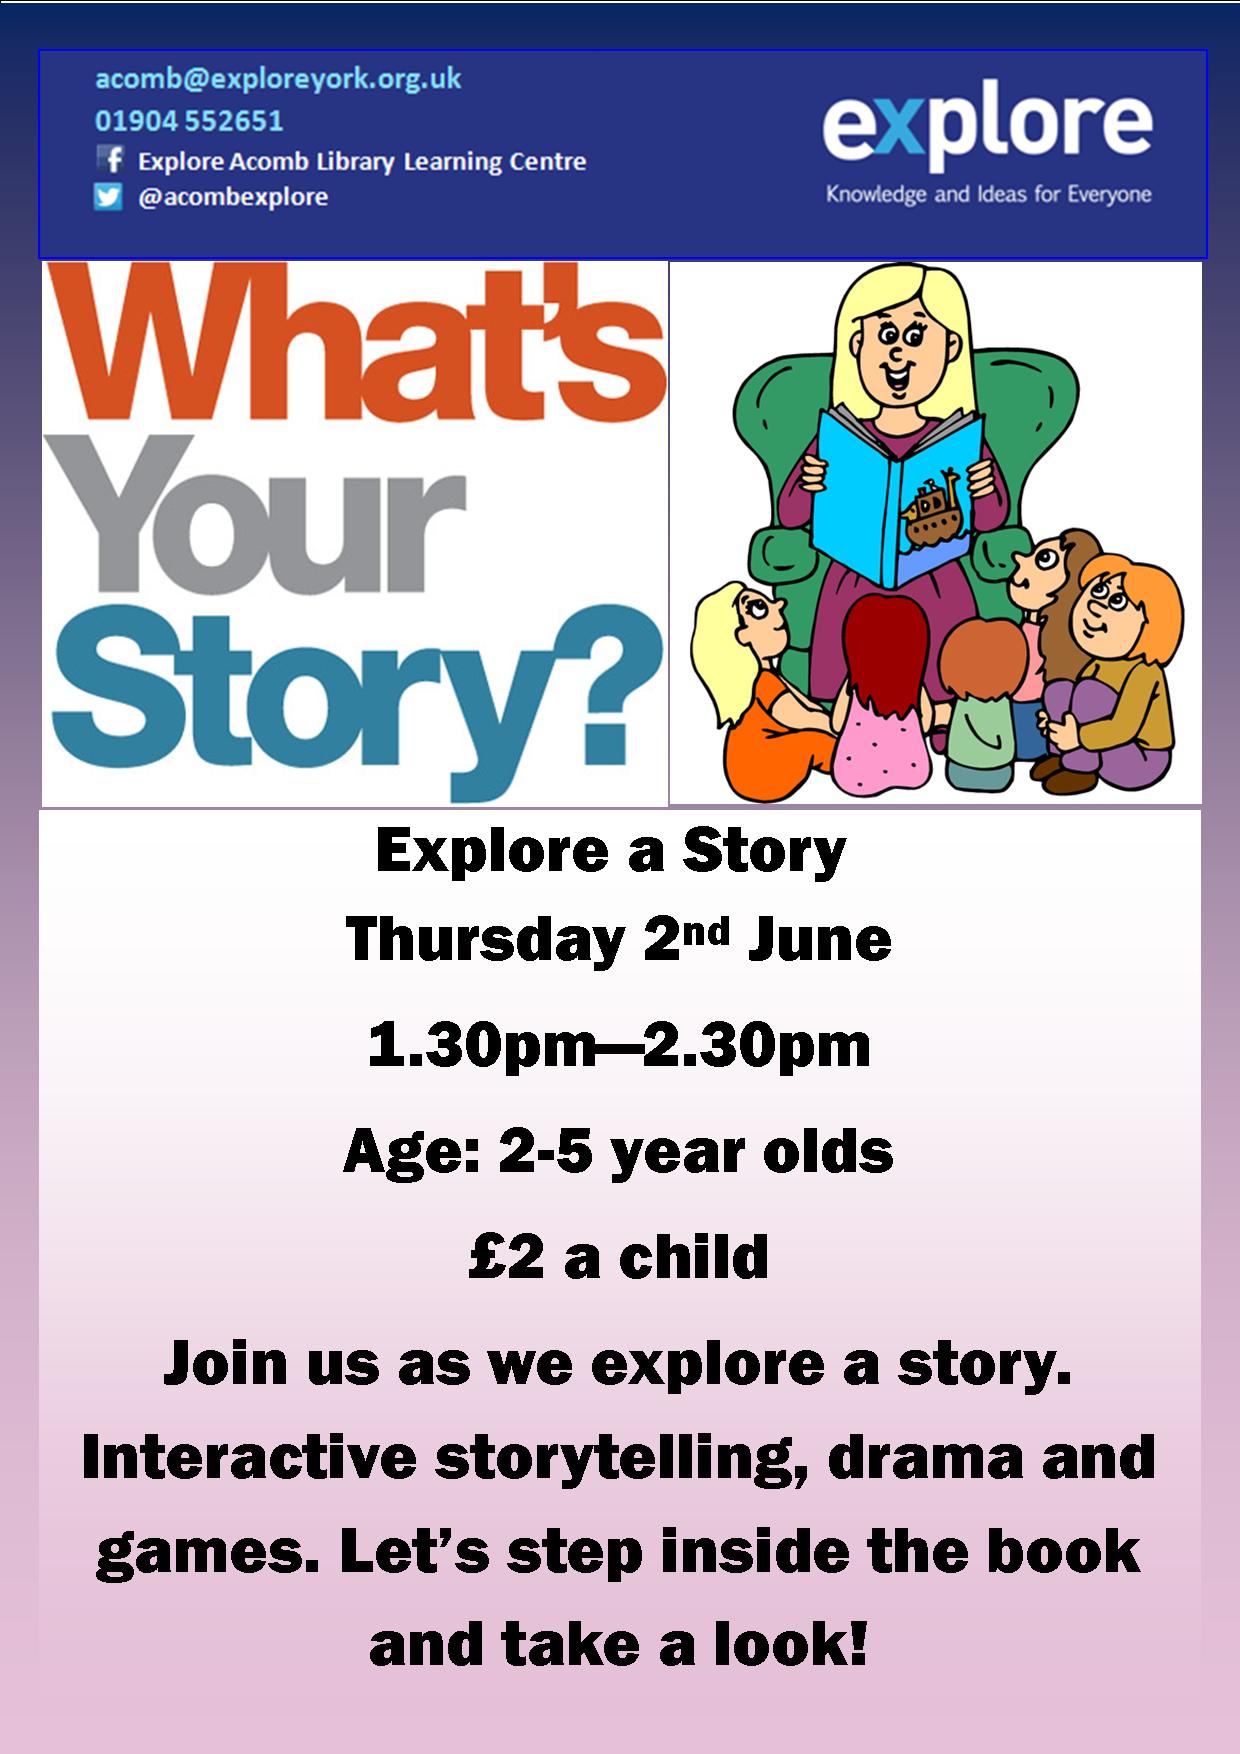 Explore a story 2nd June 2016